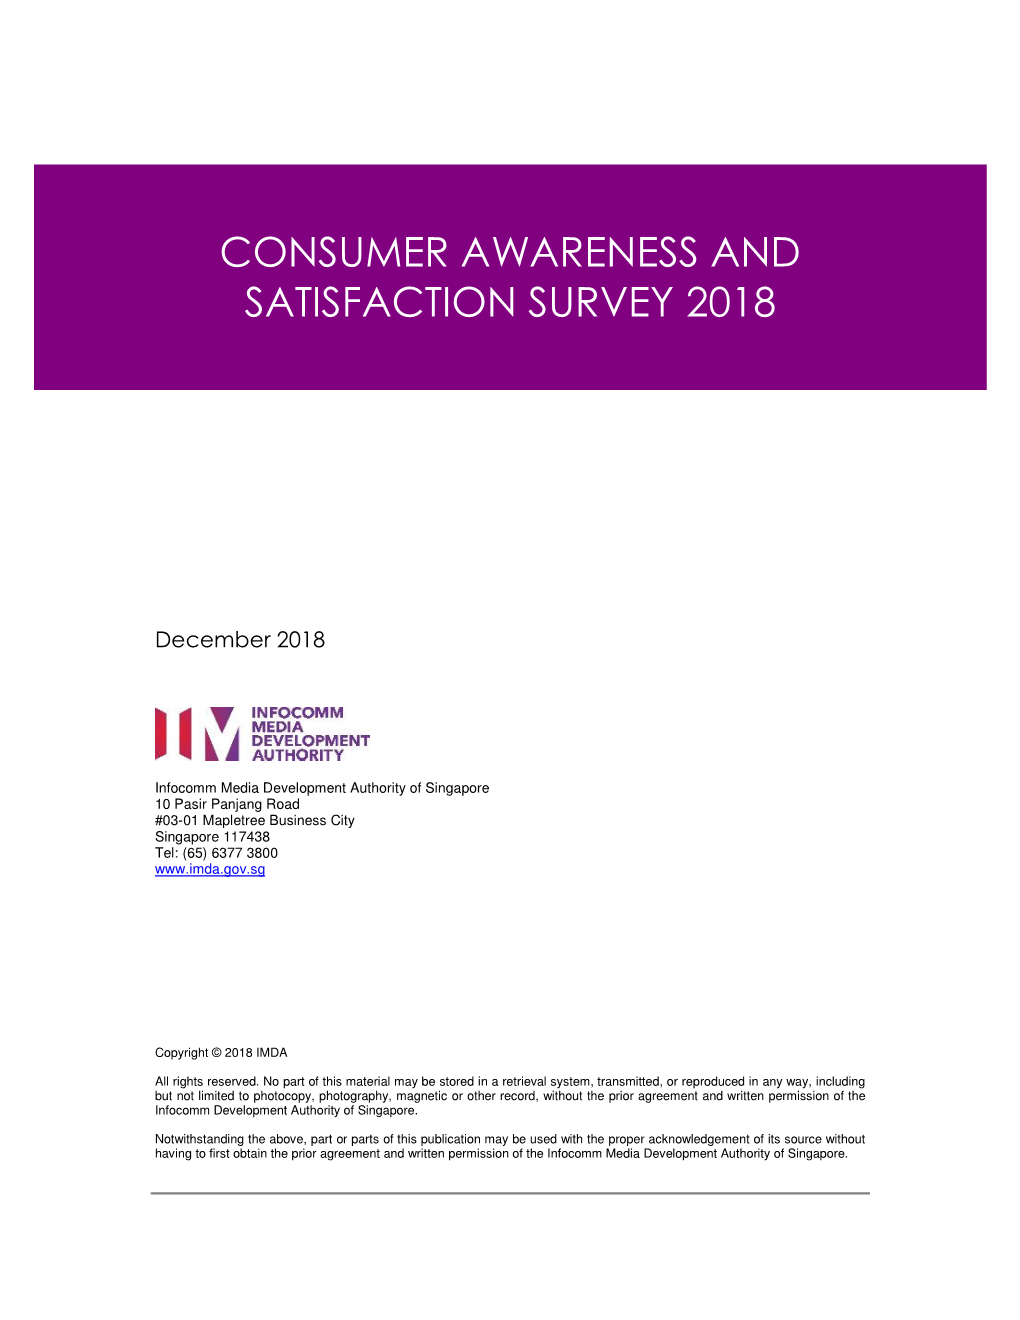 Consumer Awareness and Satisfaction Survey 2018